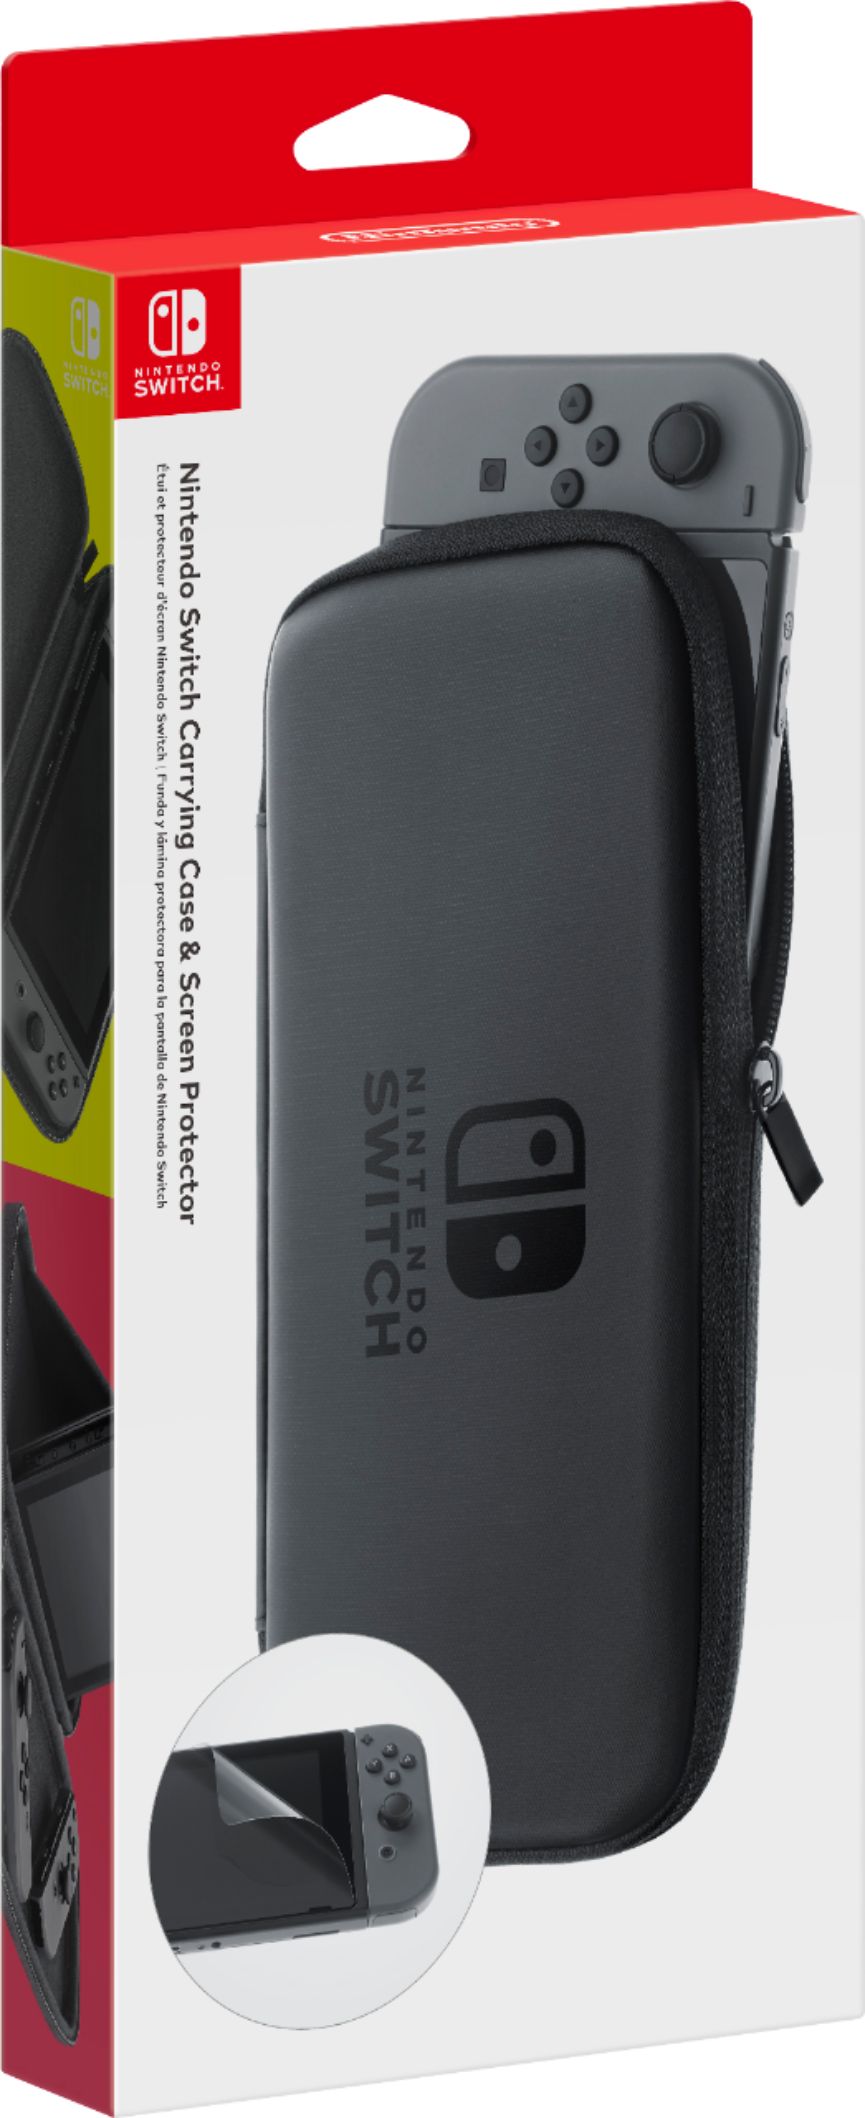 nintendo switch official case